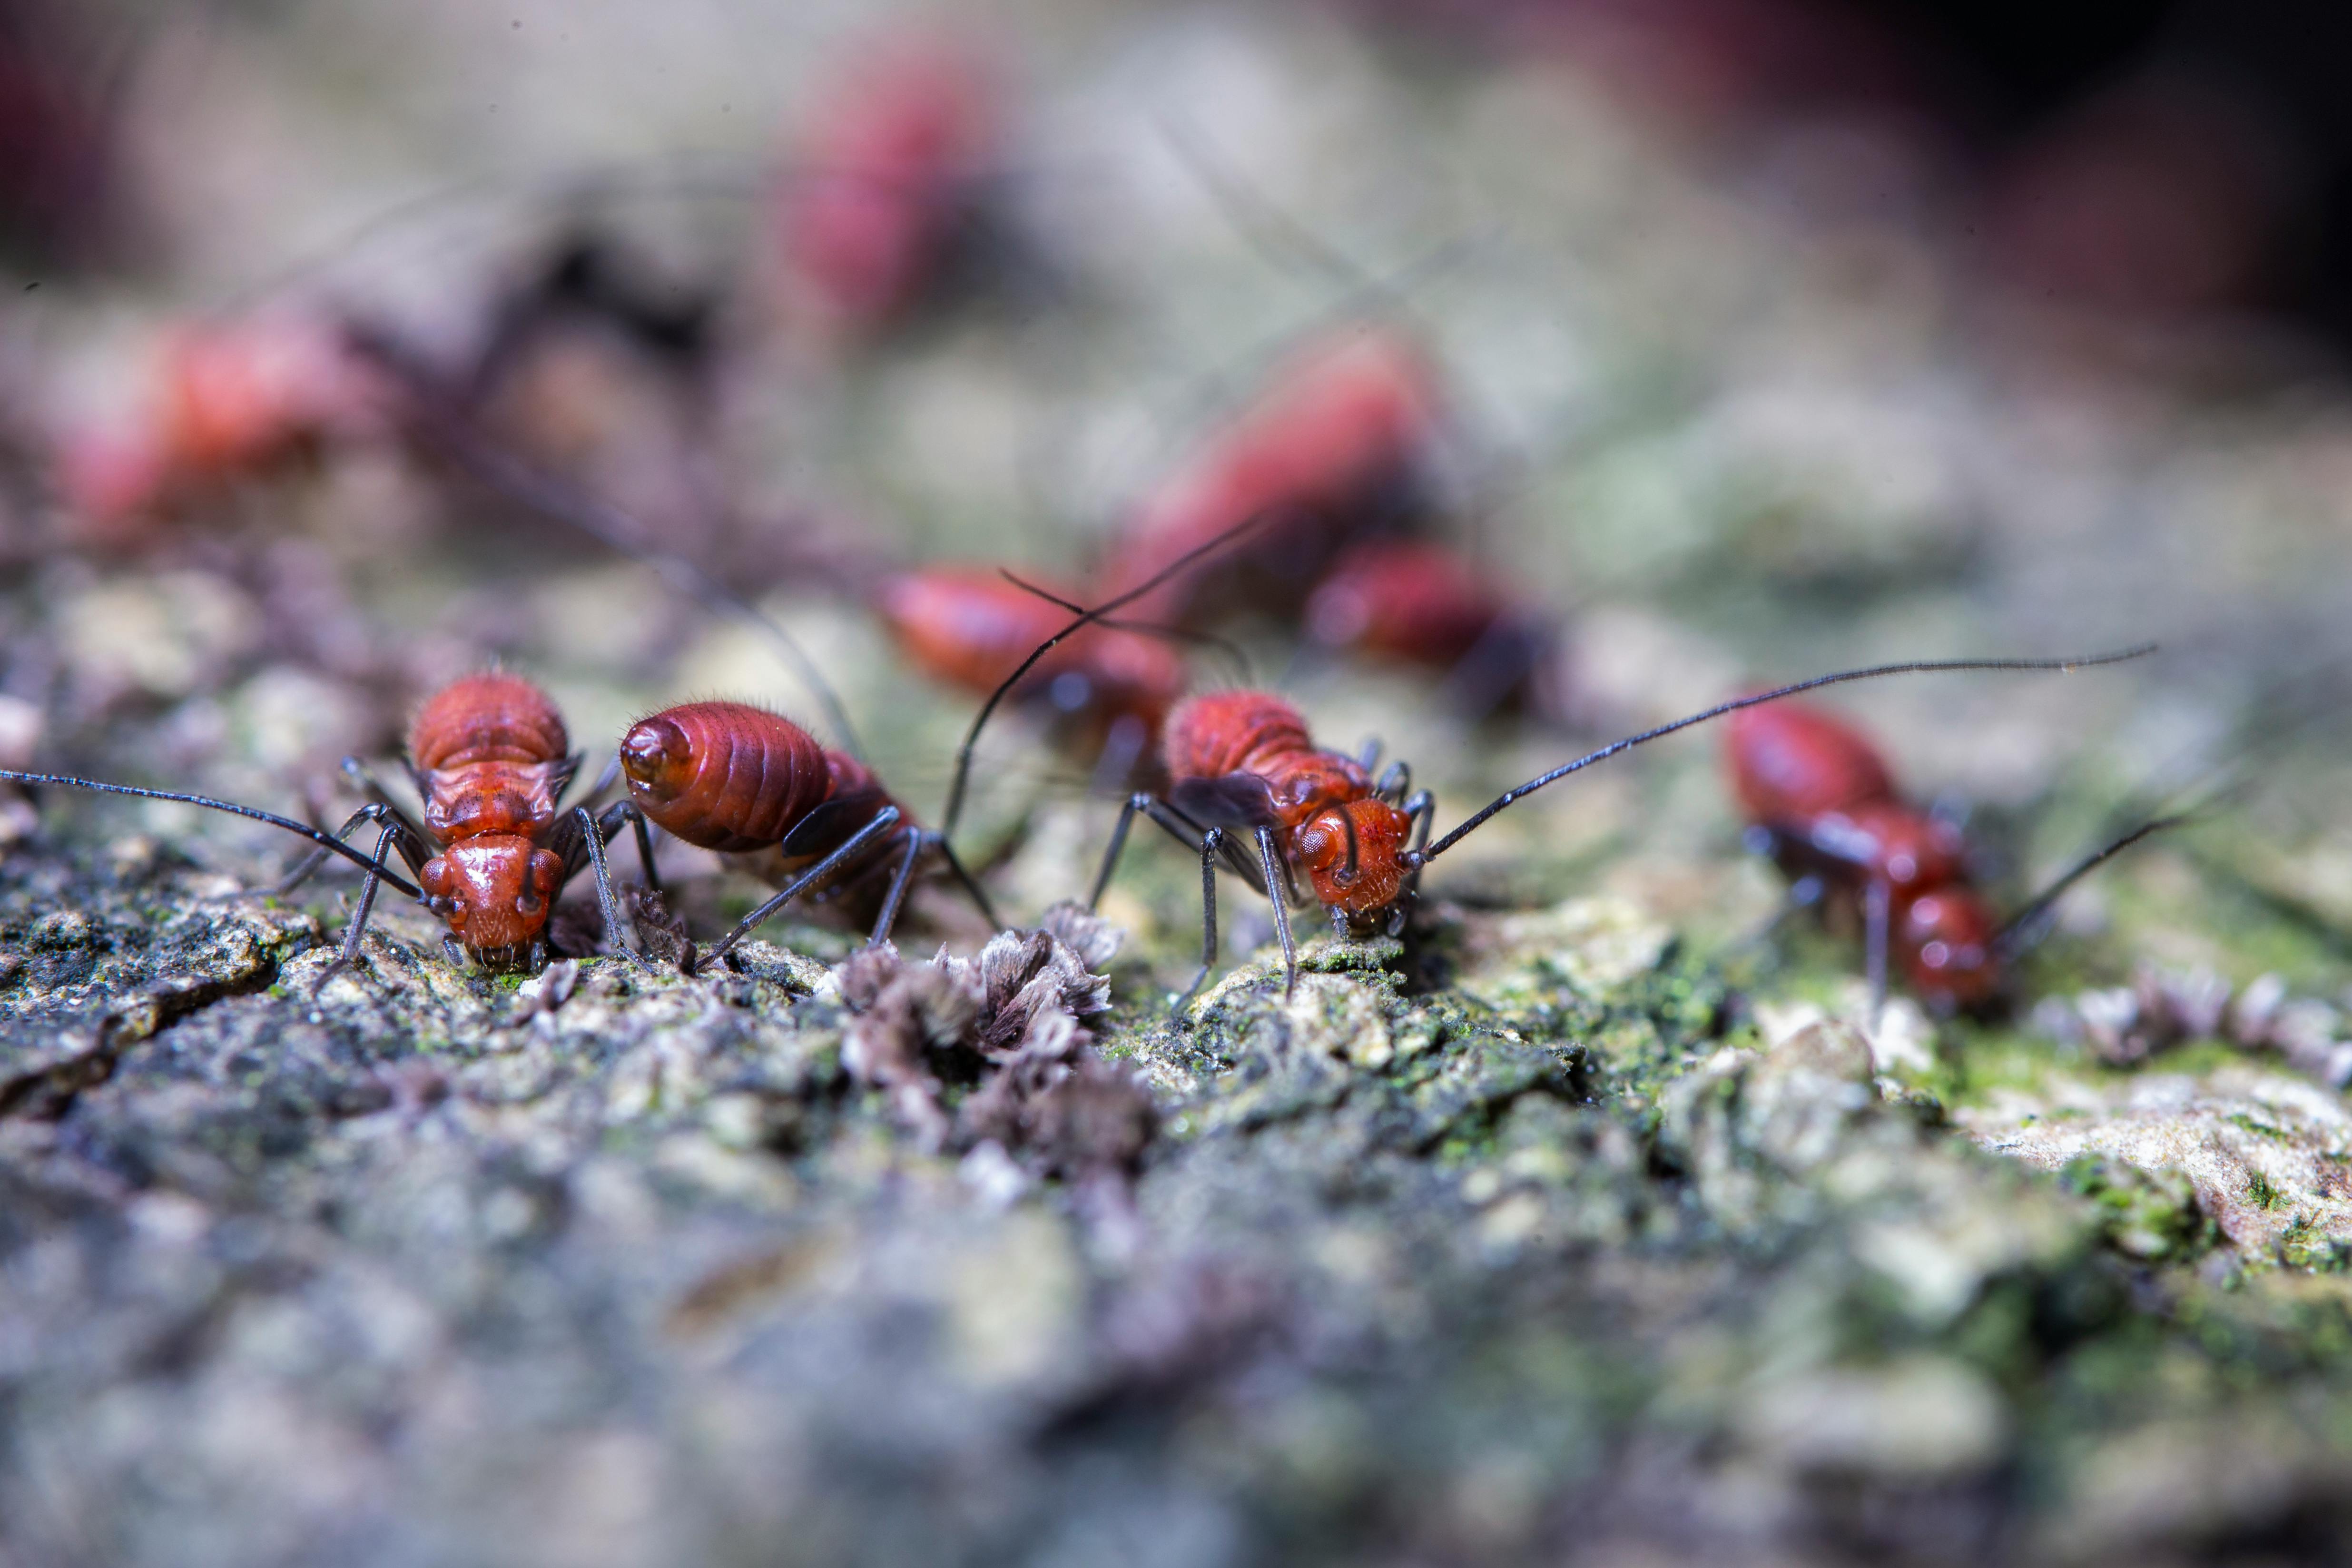 Ant Control Experts in Rosenberg, TX